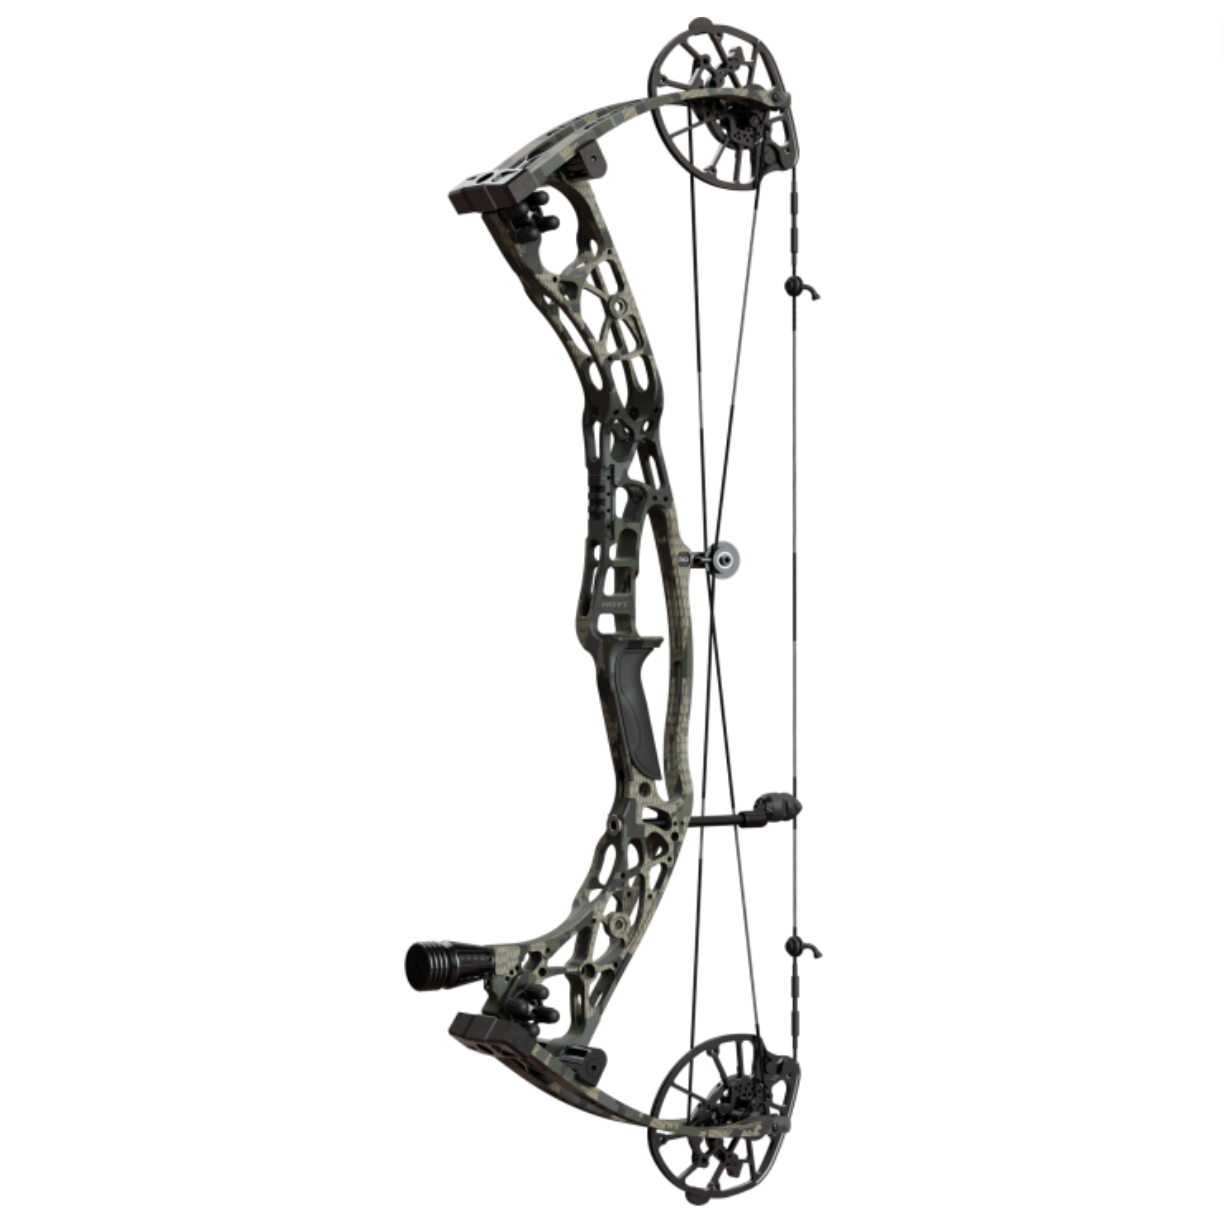 Hoyt Alpha X 30 Compound Hunting Bow